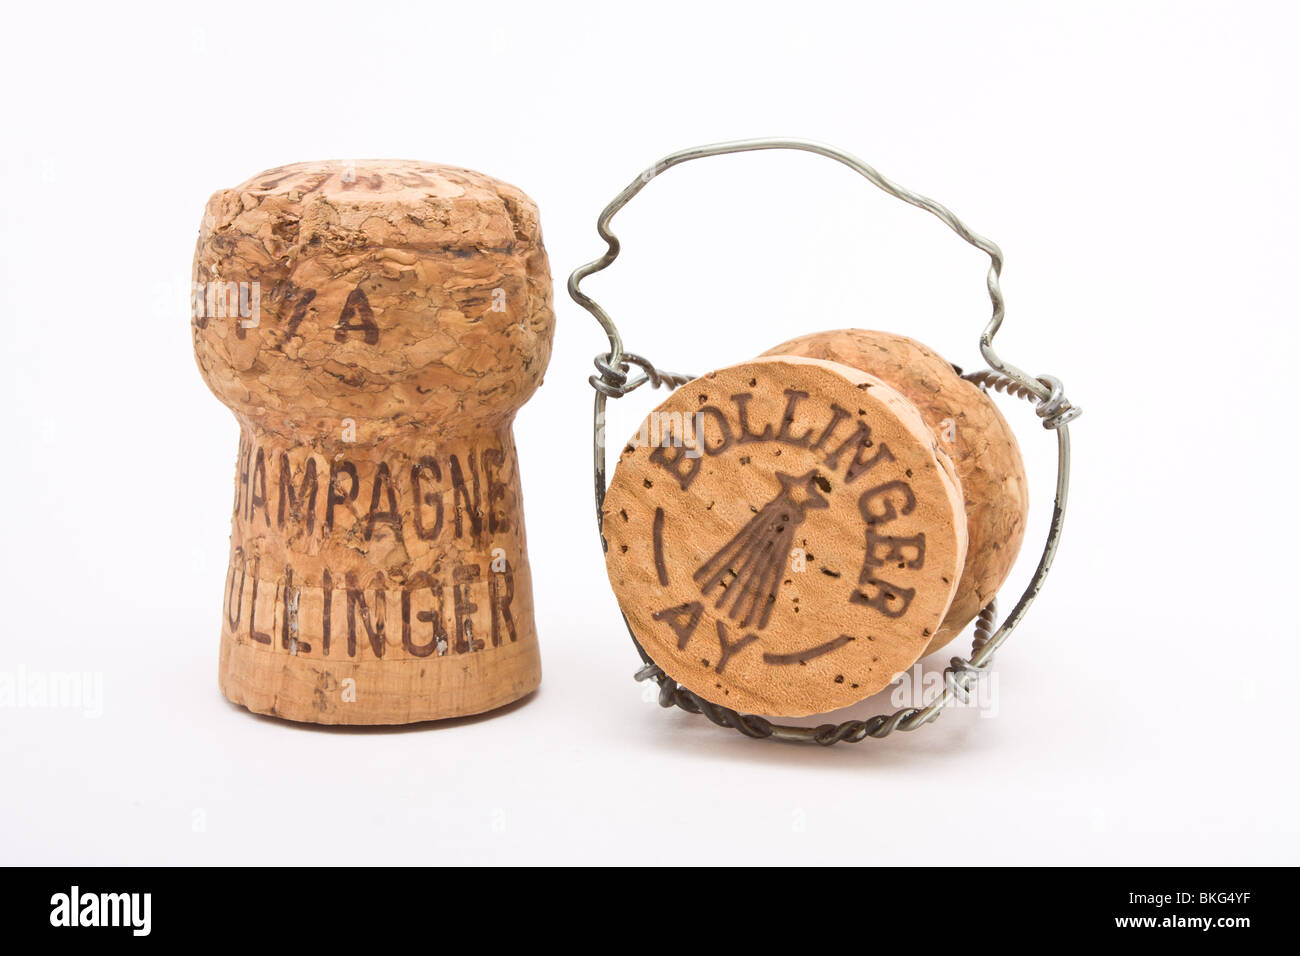 Champagne Corks from expensive bottle of vintage Bollinger French champagne isolated against white background. Stock Photo